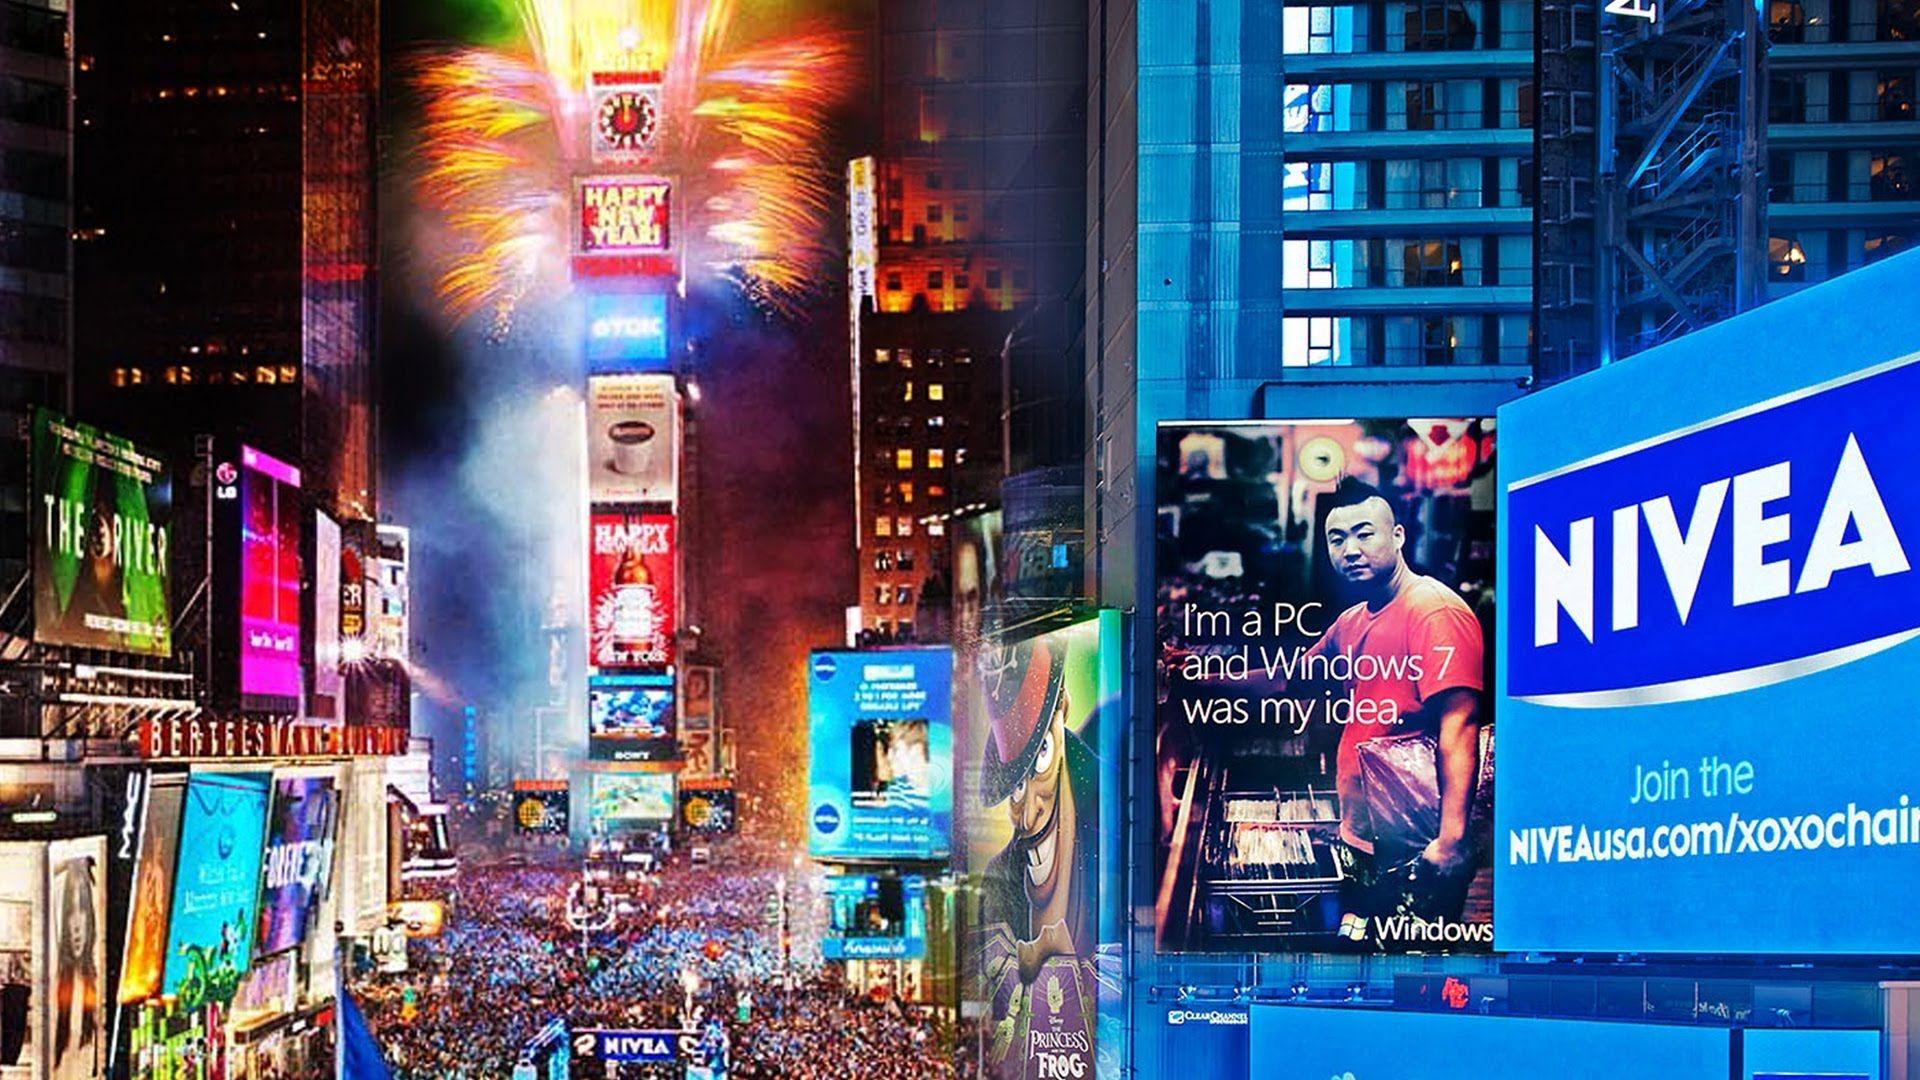 new years times square video